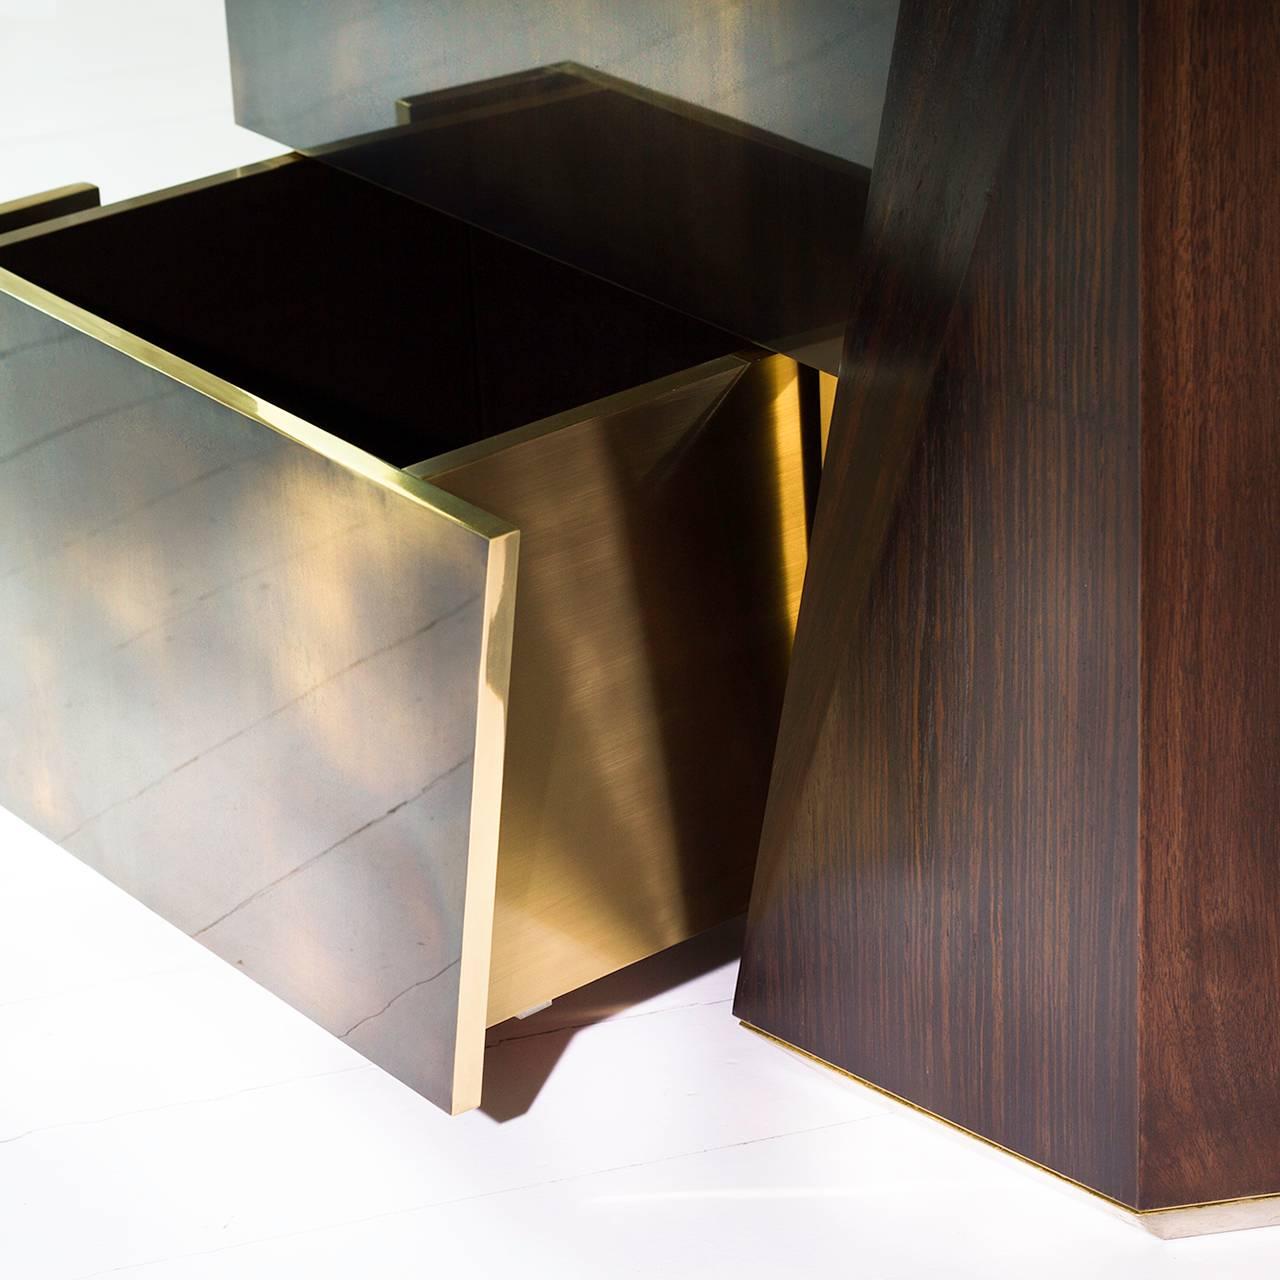 Blackened Pair of MMXVIGC Dual Drawer Brass and Walnut Nightstand Console or Side Table